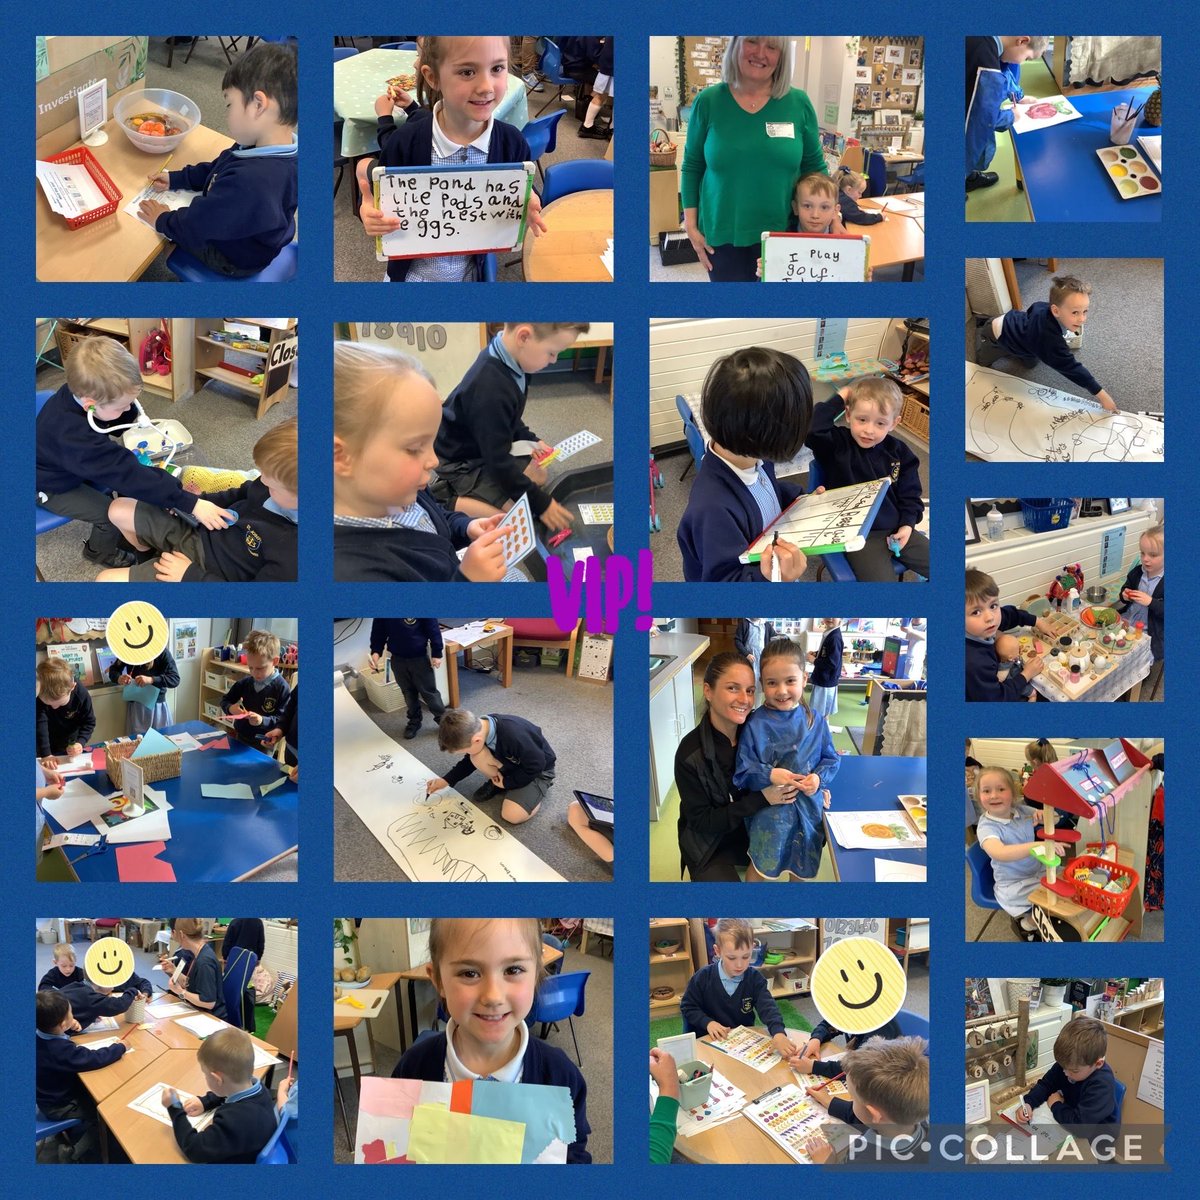 Reception had their last ‘See how we learn’ session today! The children have really enjoyed them! This week, we are continuing our work on ‘Supertato’ and a healthy lifestyle. The children have been very busy as you can see! #eyfsstjoes